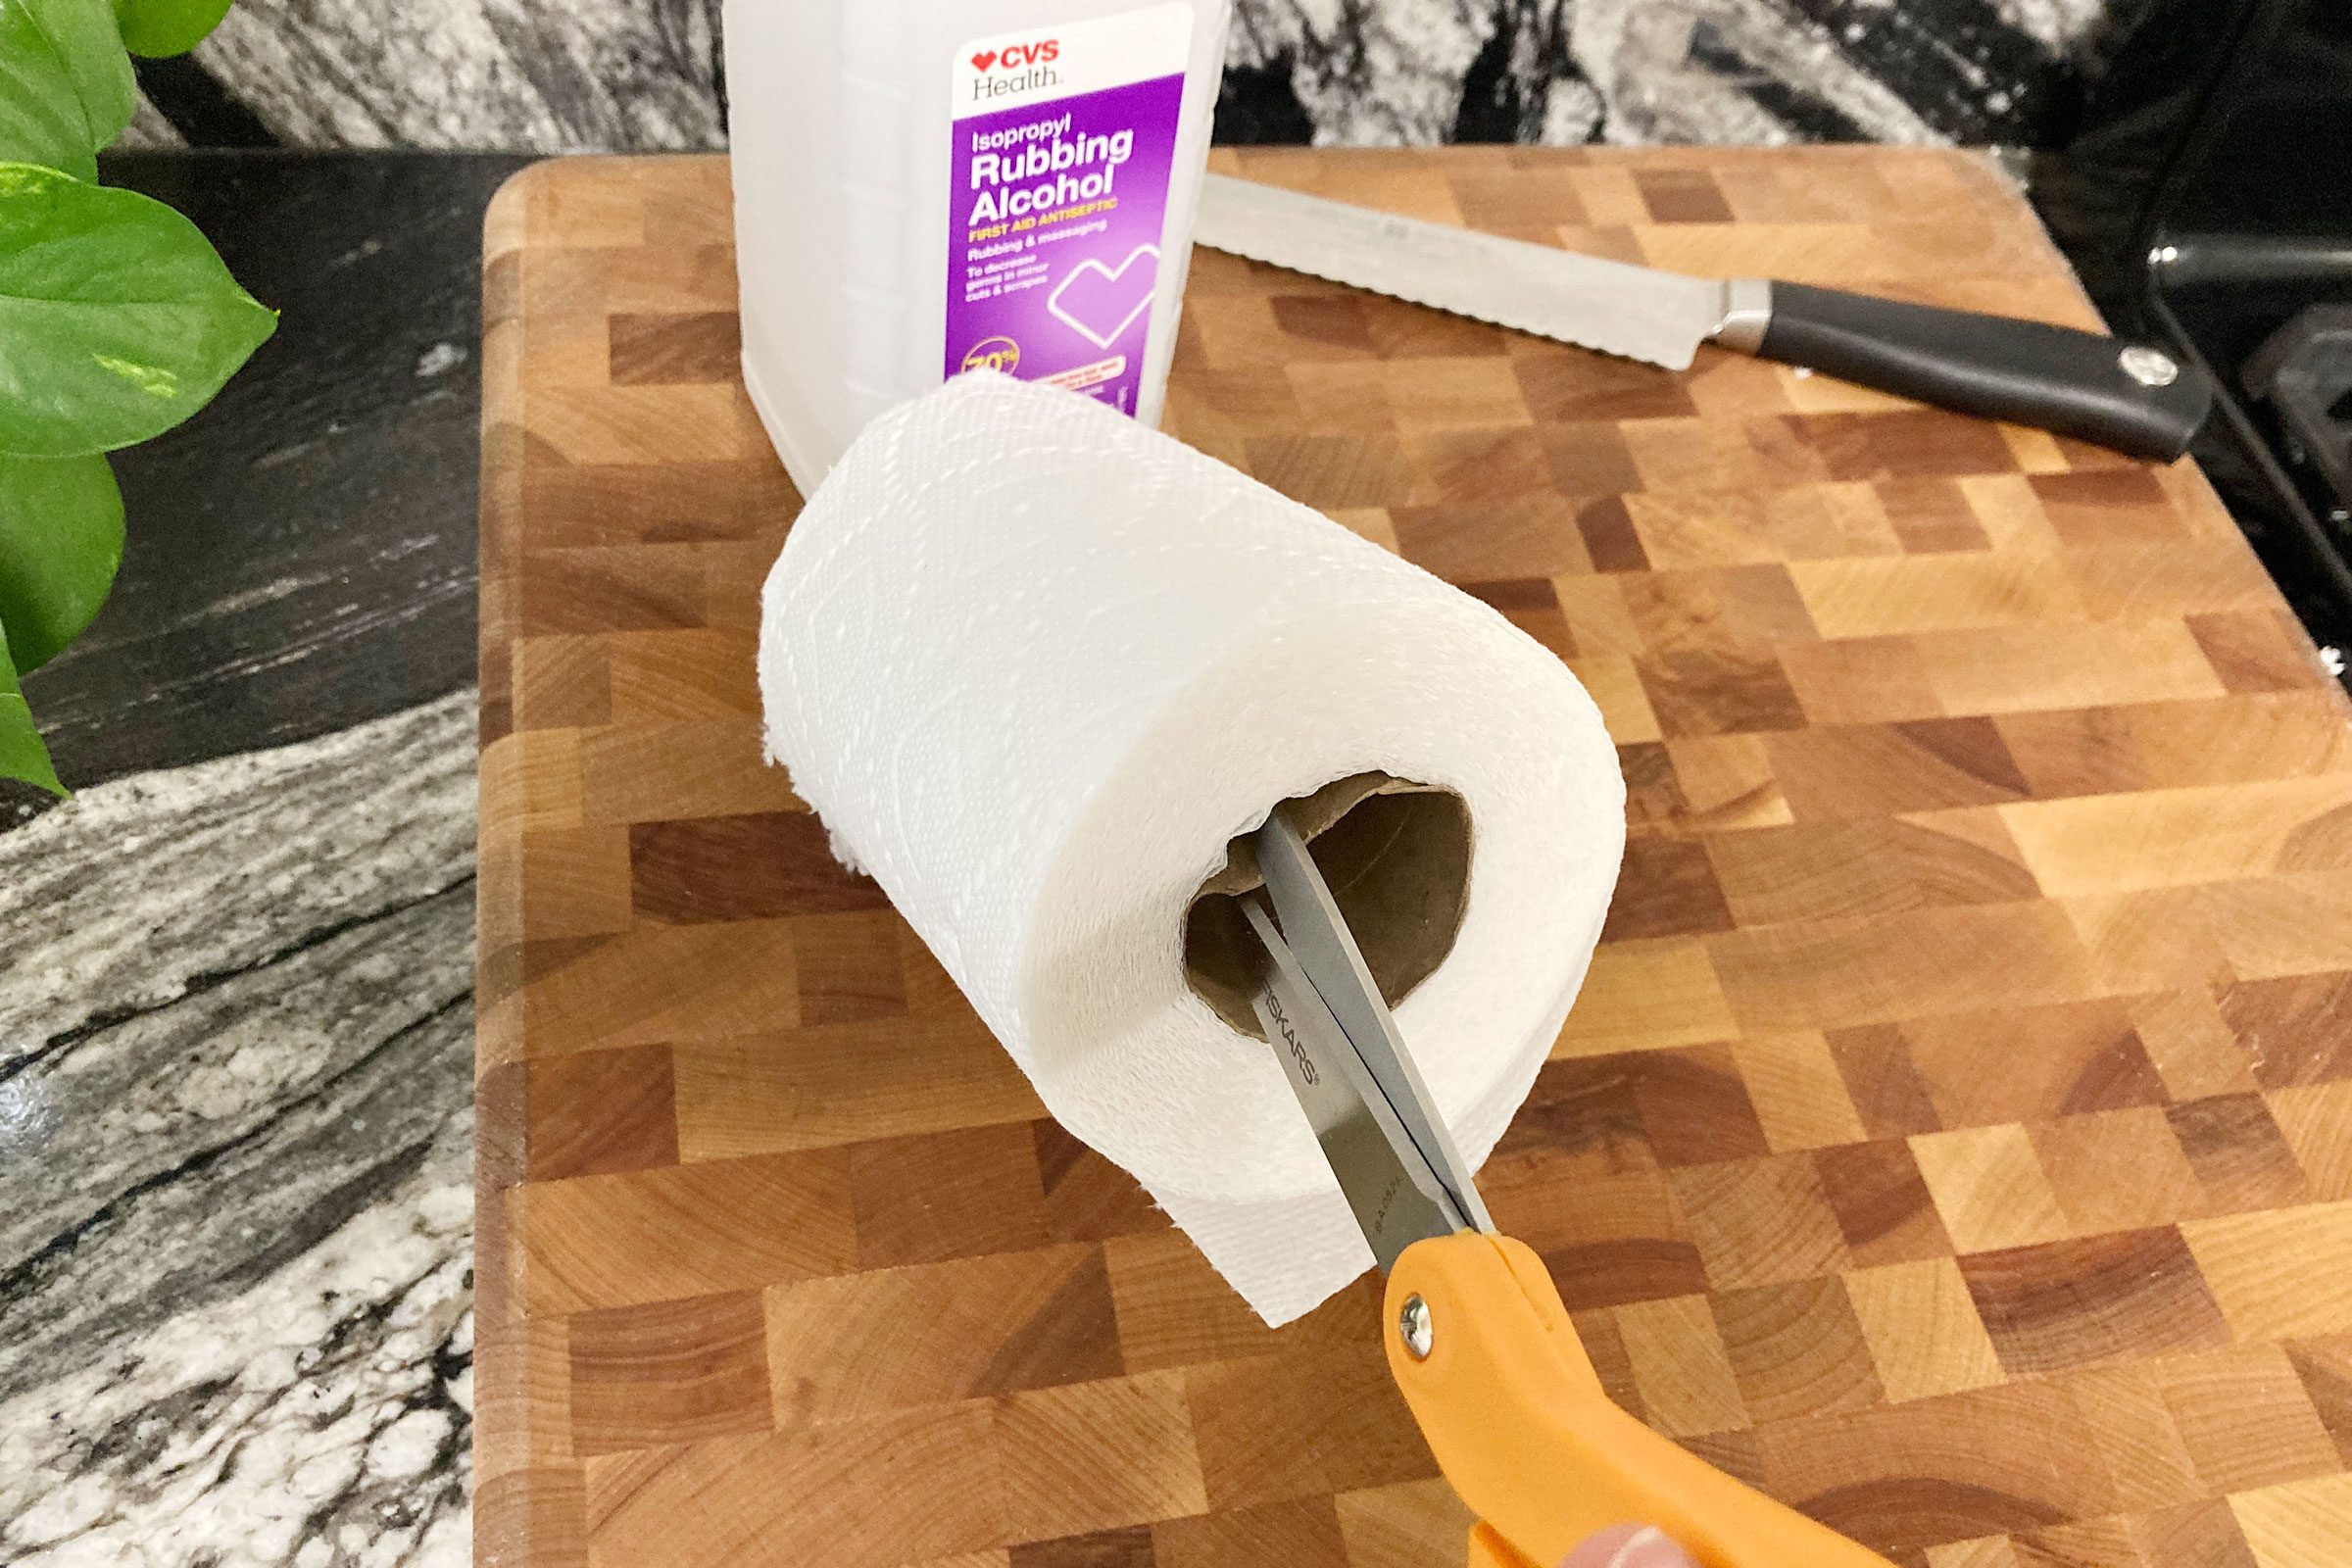 Step 3 Remove Cardboard for disinfectant wipes